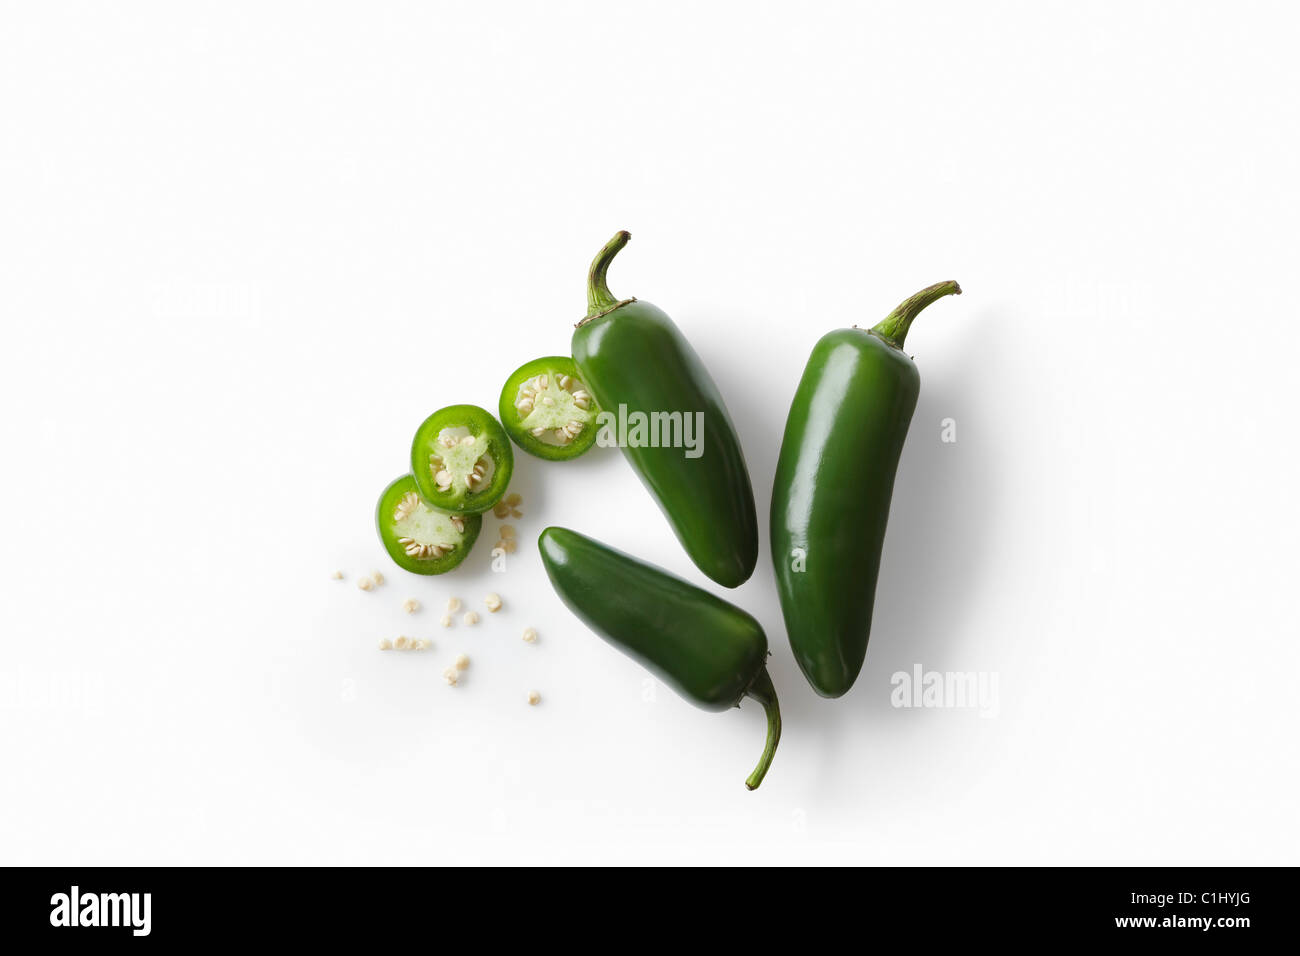 Jalapeno Peppers Stock Photo